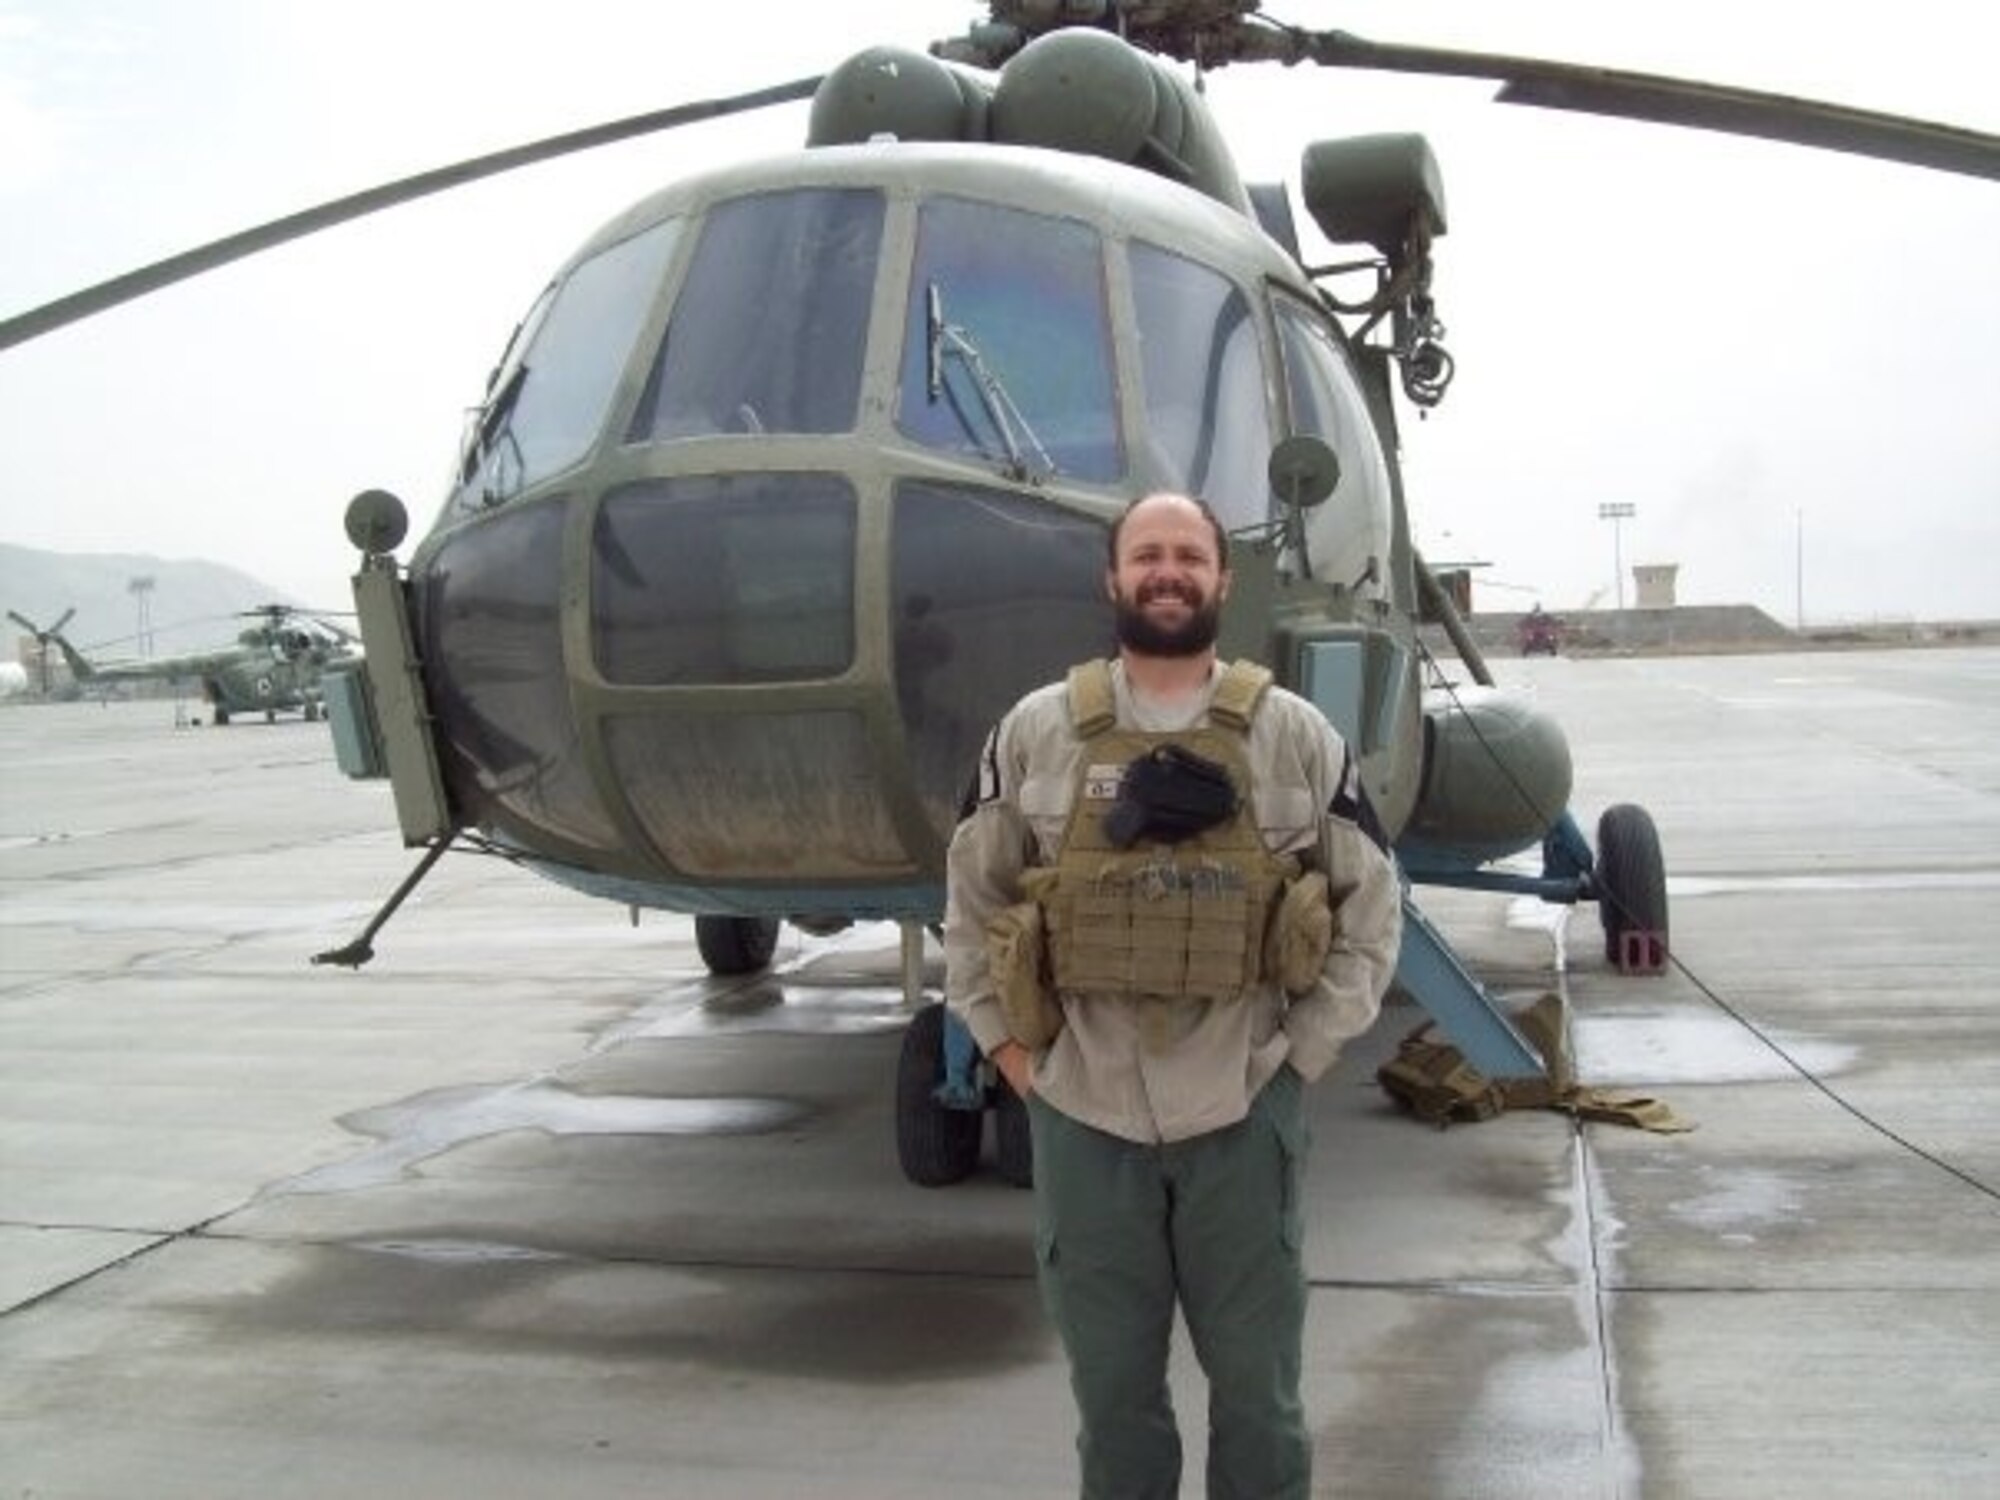 Matthew, Northrup-Grumman chief pilot, stands in front of his Russian Mil Mi-17 helicopter in Afghanistan in 2011. During this point in his career, Matthew also served in the U.S. Army Reserves while taking seminary classes online which would lead to his current assignment as a U.S. Air Force Chaplain at Creech Air Force Base, Nev. (Courtesy photo)